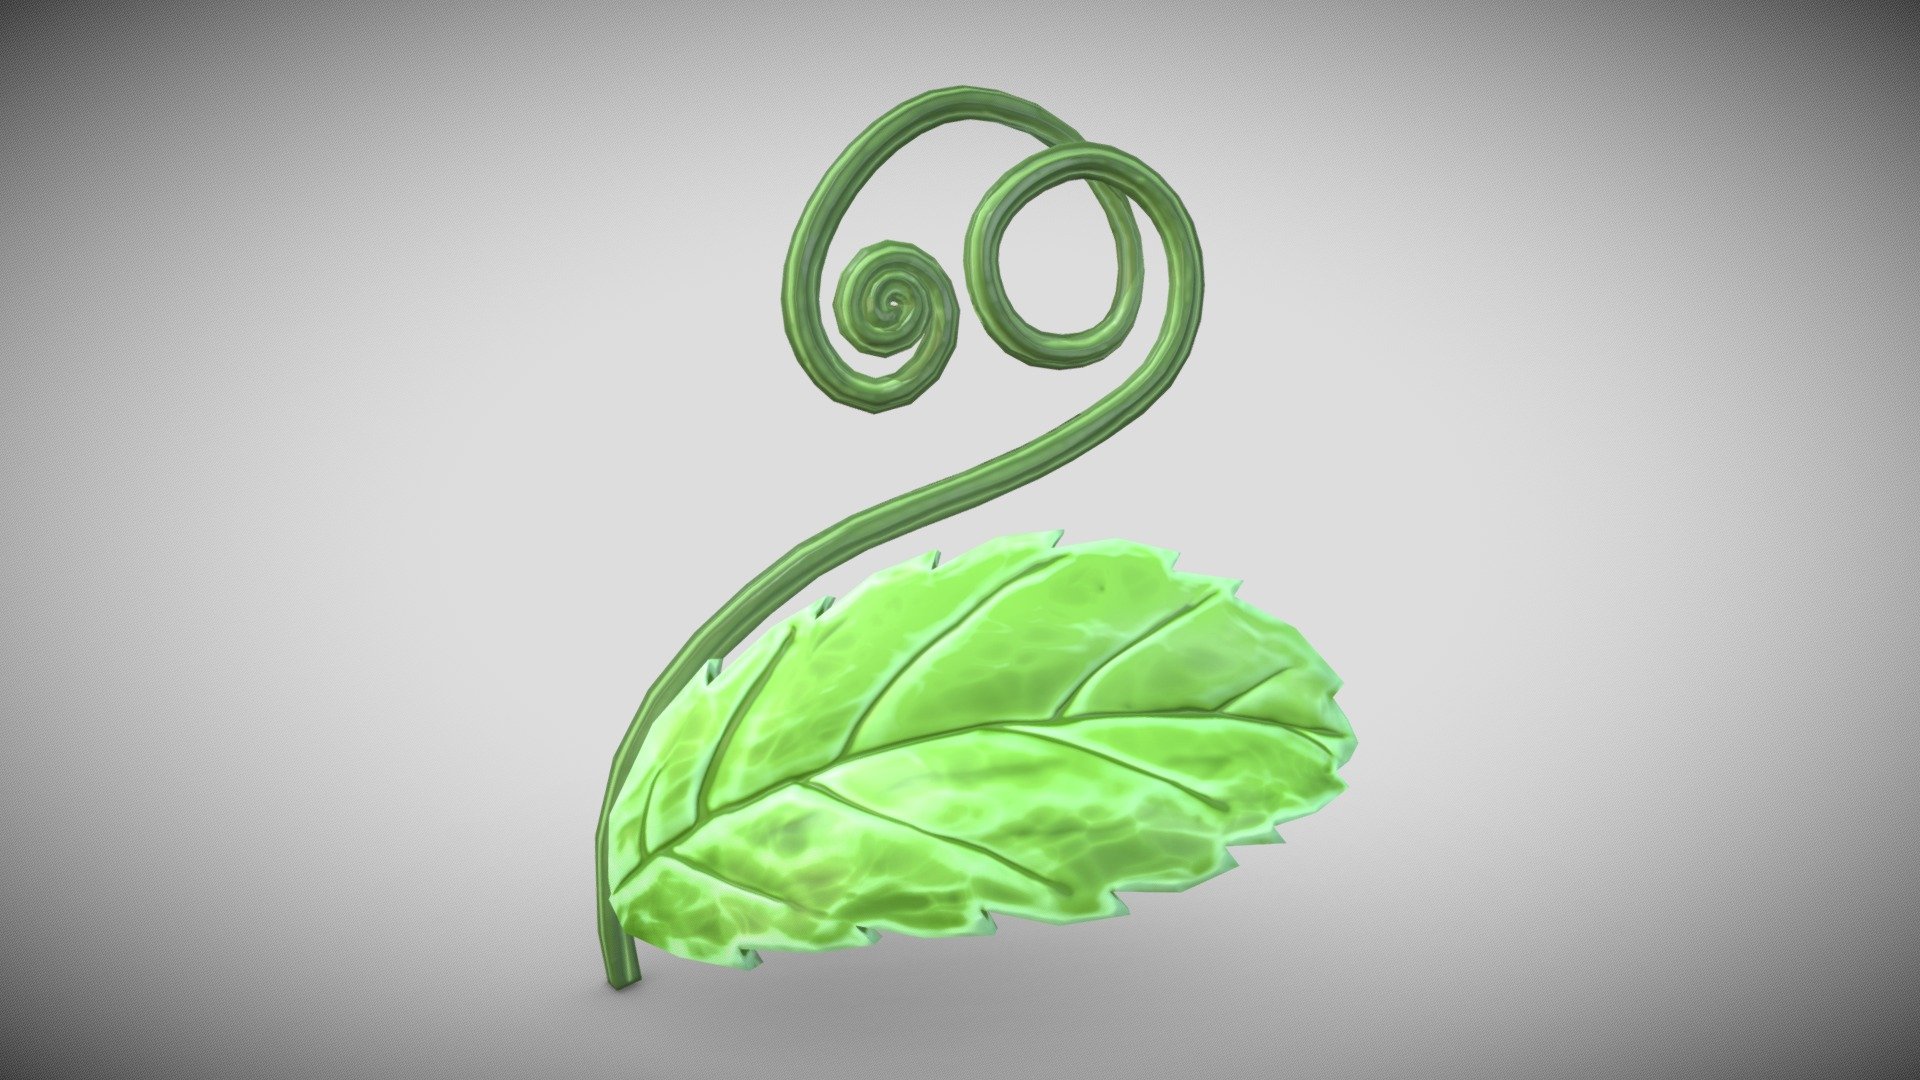 If you need additional work done do not hesitate to contact me, I am currently available for freelance work.

This curly leafy tendril would fit to grapes or a vine yard. Also in a fantastic scene or game in the woods or forest as stylized plant for fairies and animals.

603 Vertices

Highpoly sculpted in Nomadsculpt. Lowpoly made in Blender
Highpoly and Lowpoly-model are in a Blend-file included in additional file with embedded materials.
Model and Concept by Me, Enya Gerber 3d model